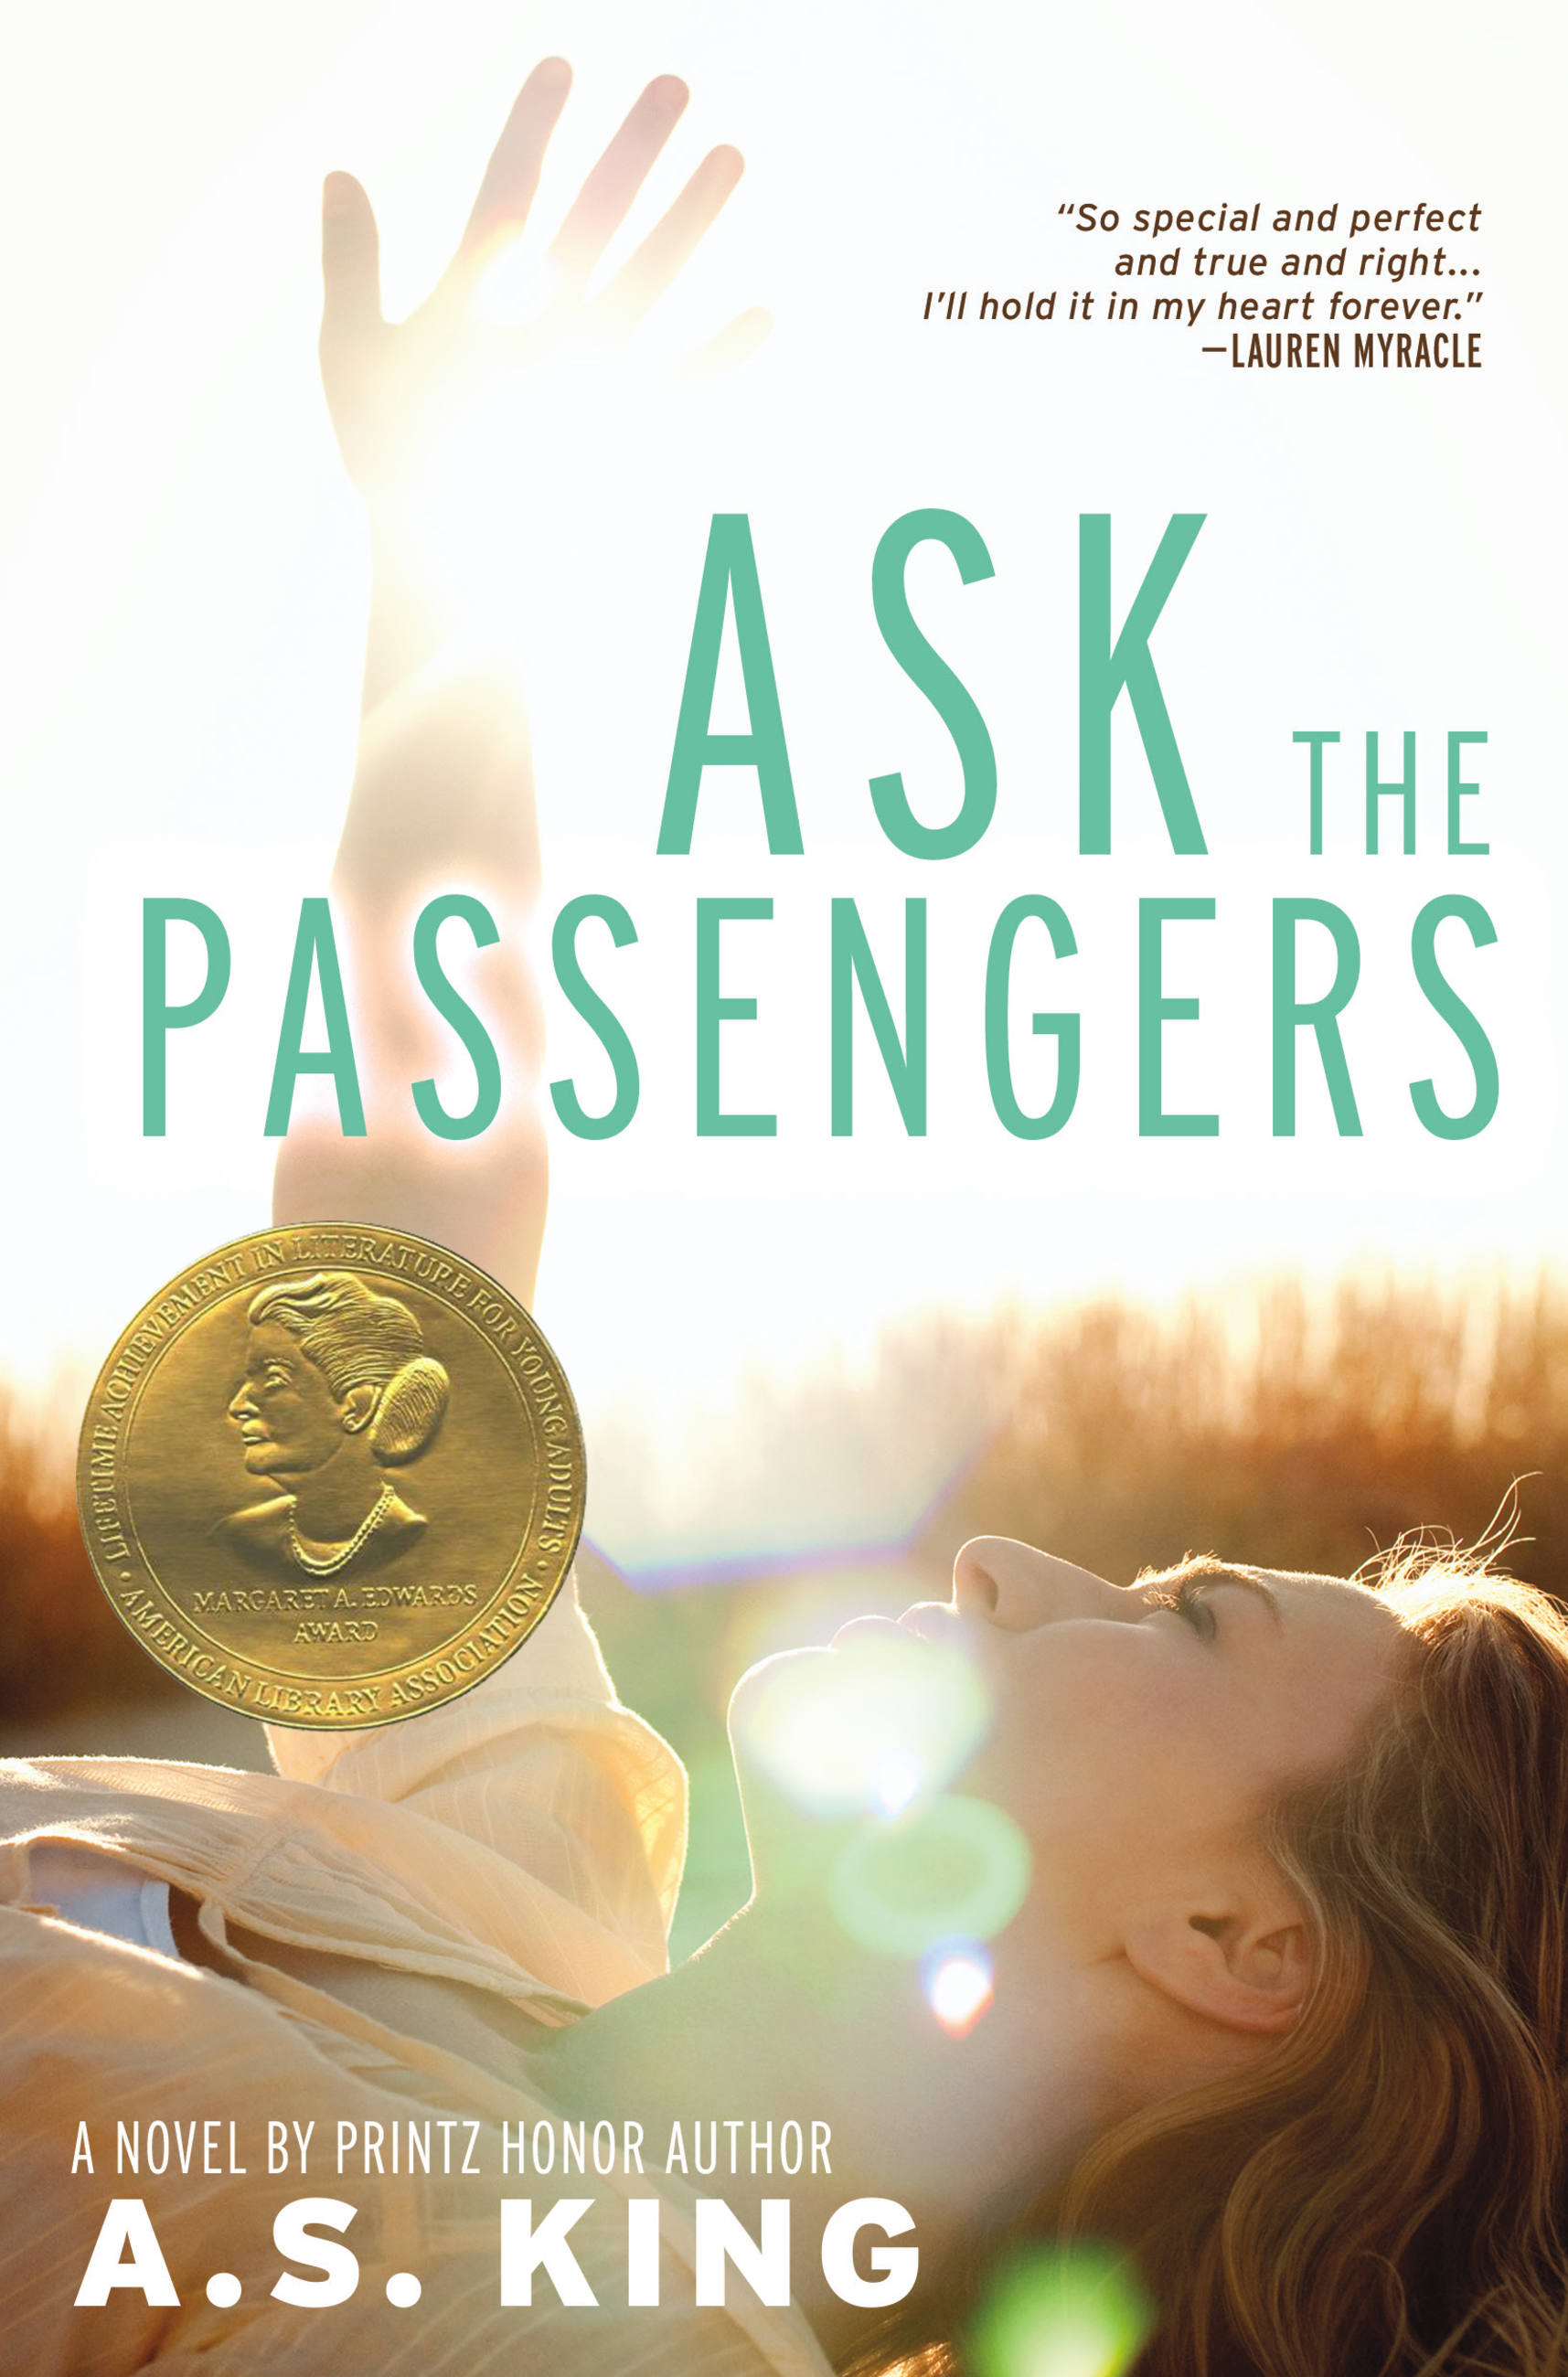 Ask the Passengers by A.S. King | Hachette Book Group